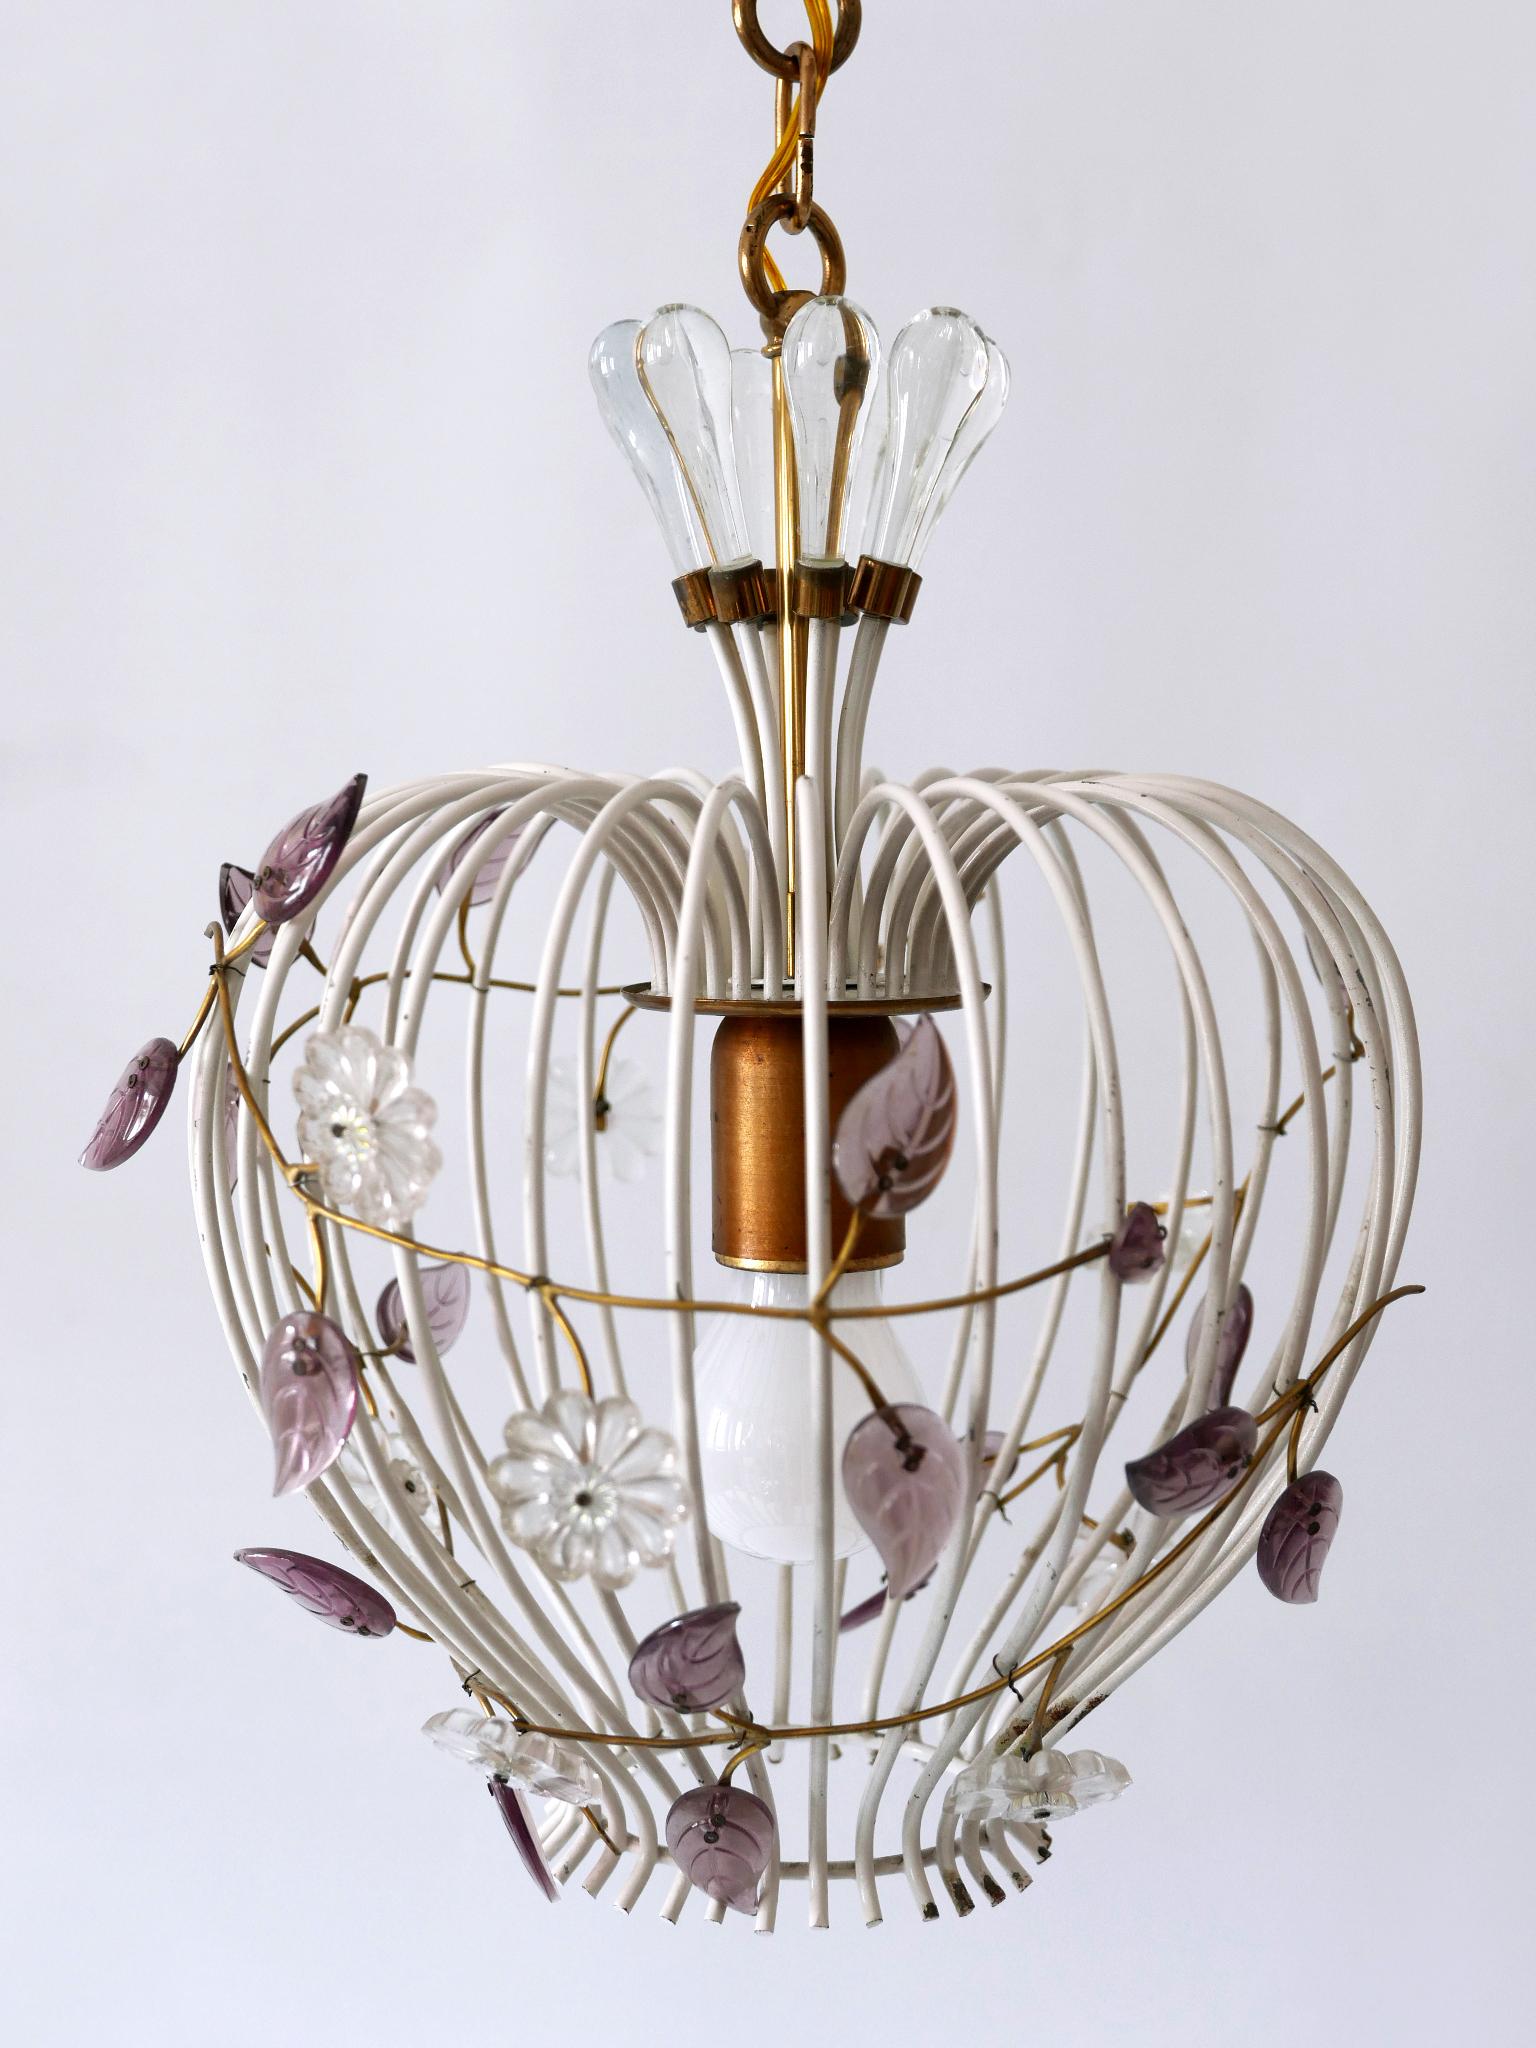 Mid-20th Century Lovely Mid-Century Modern Birdcage Pendant Lamp or Chandelier Germany 1950s For Sale